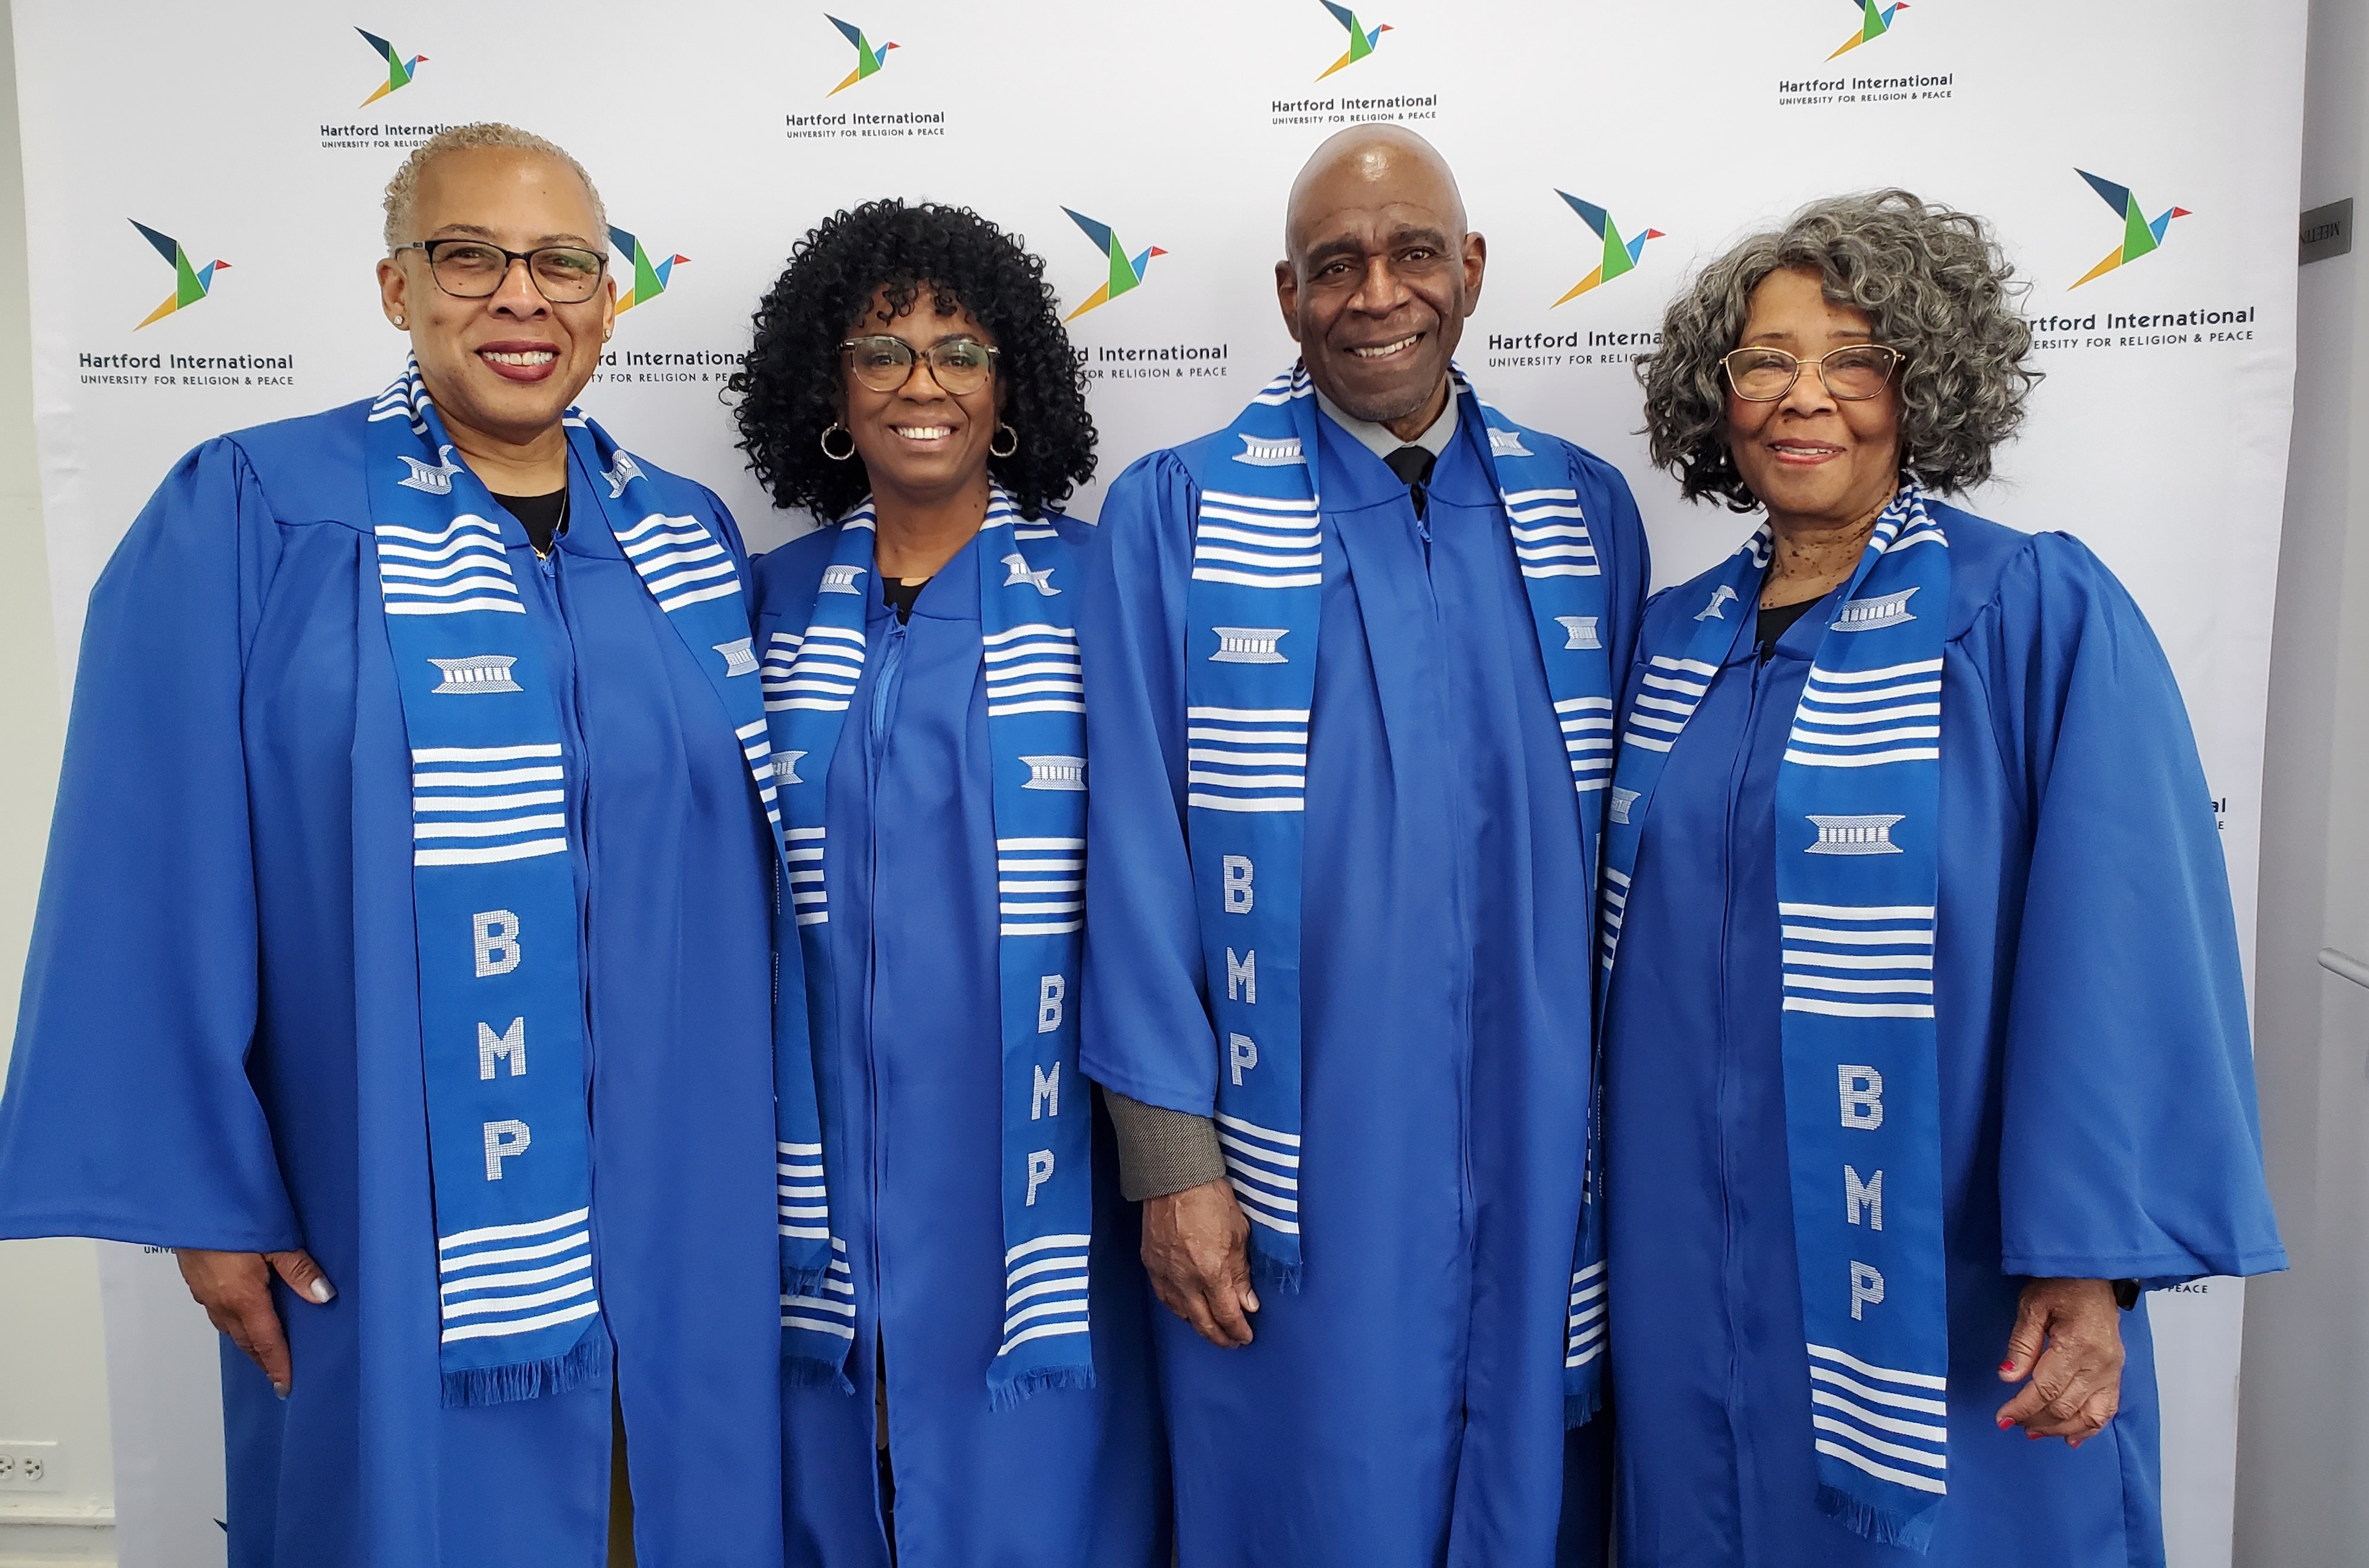 =Four people in blue graduation gowns